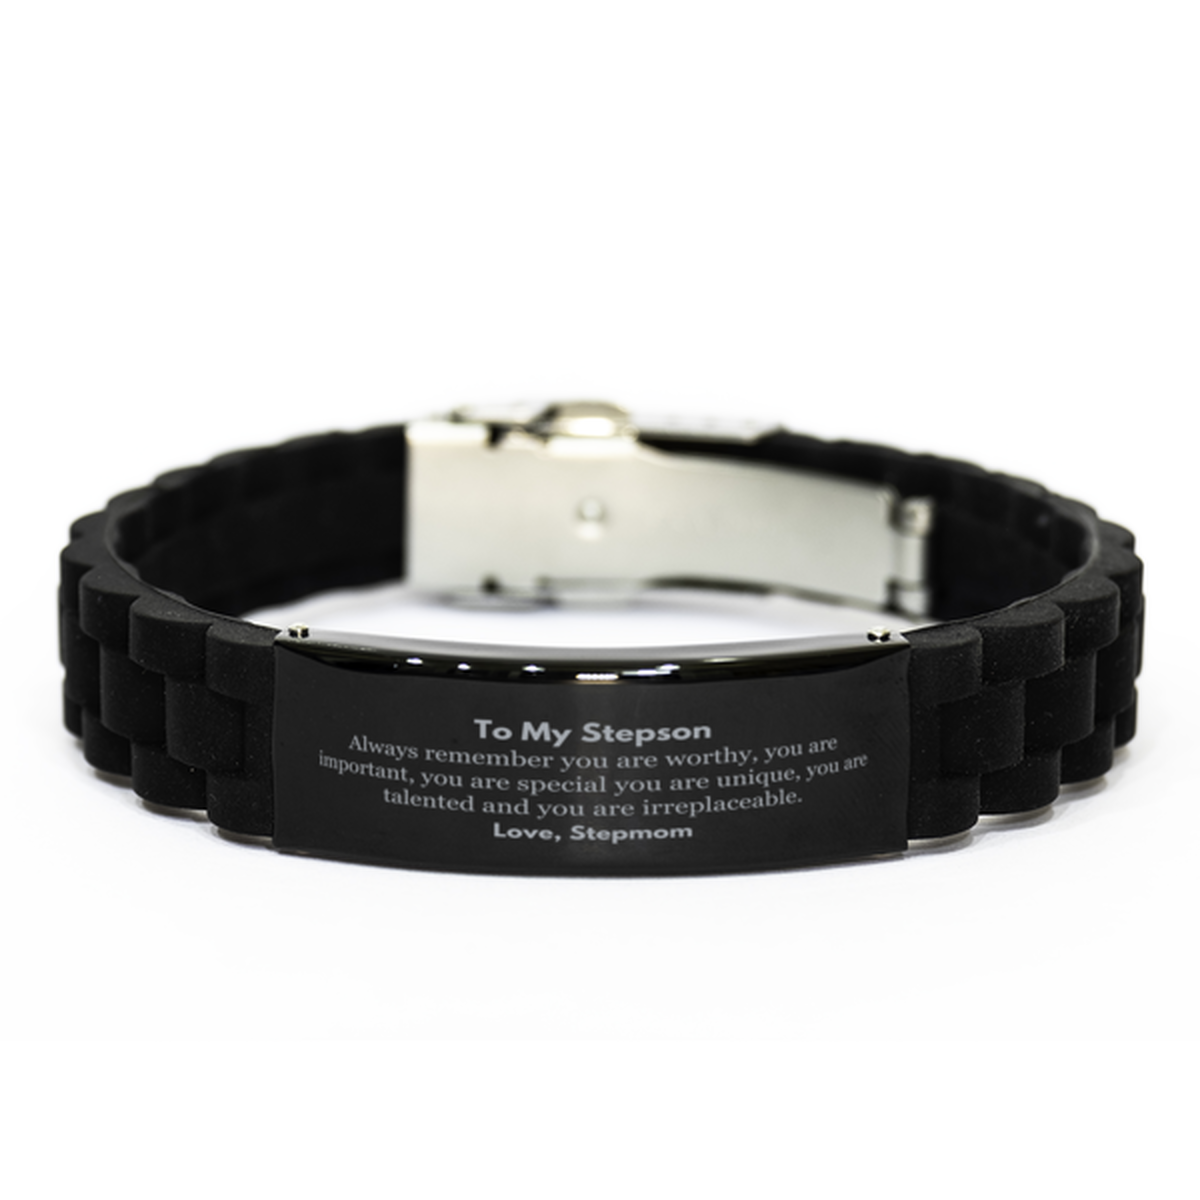 Stepson Birthday Gifts from Stepmom, Inspirational Black Glidelock Clasp Bracelet for Stepson Christmas Graduation Gifts for Stepson Always remember you are worthy, you are important. Love, Stepmom